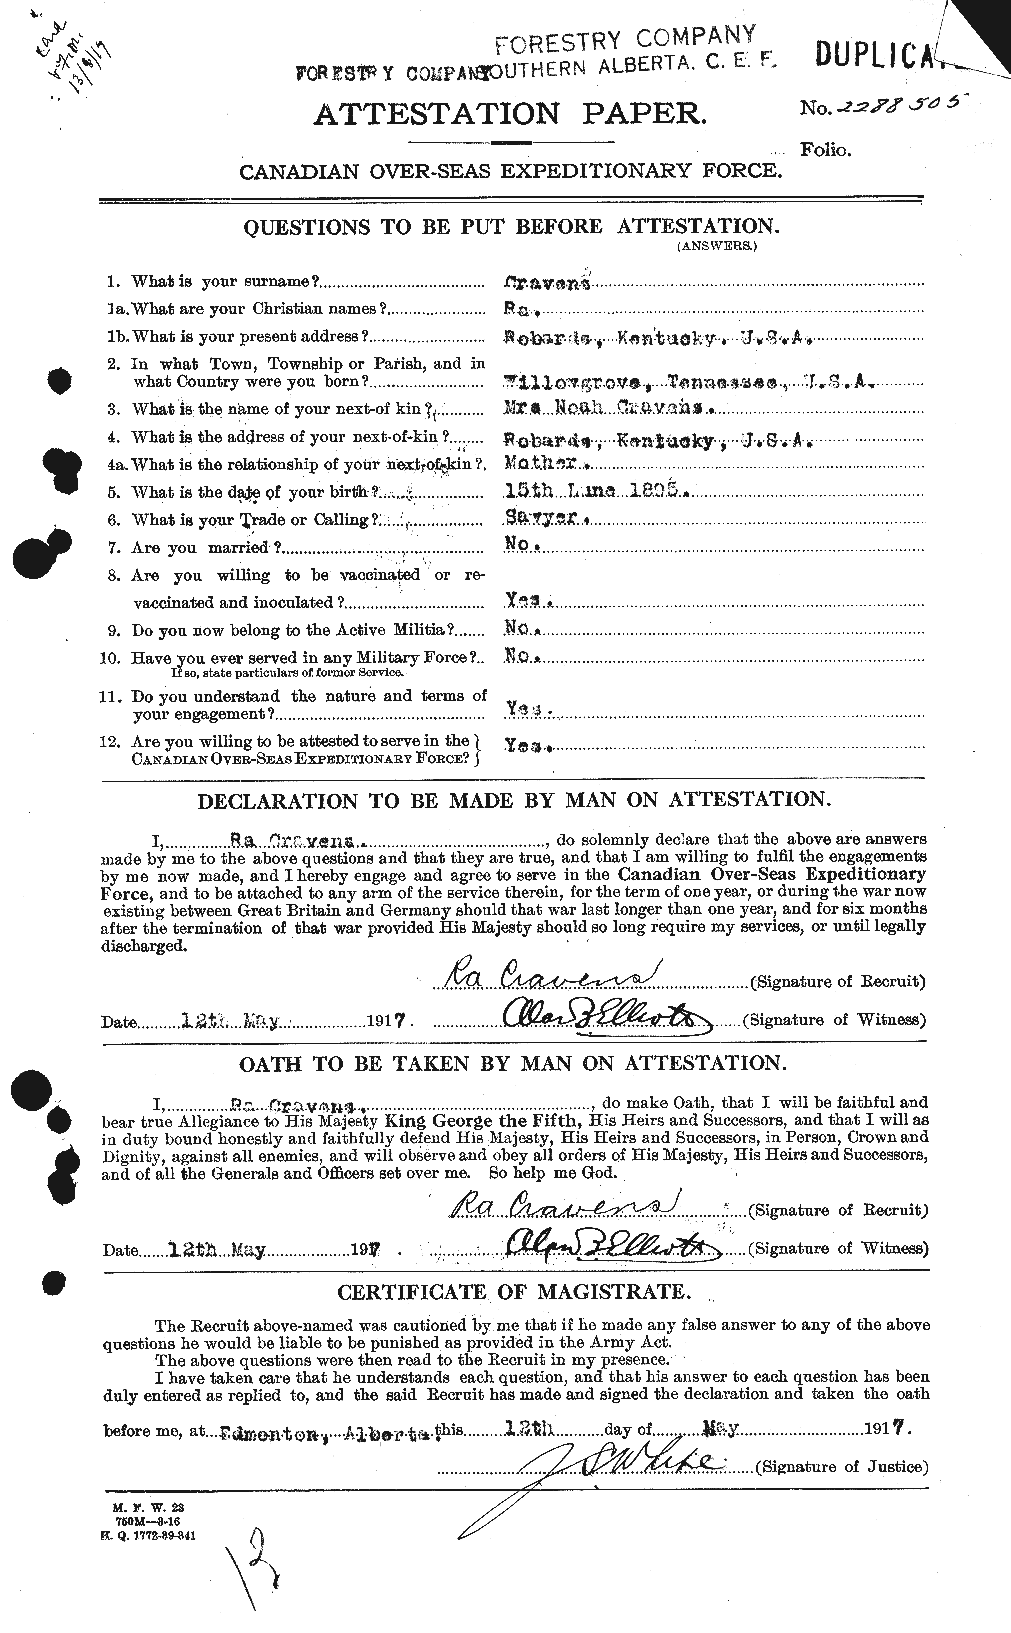 Personnel Records of the First World War - CEF 061041a